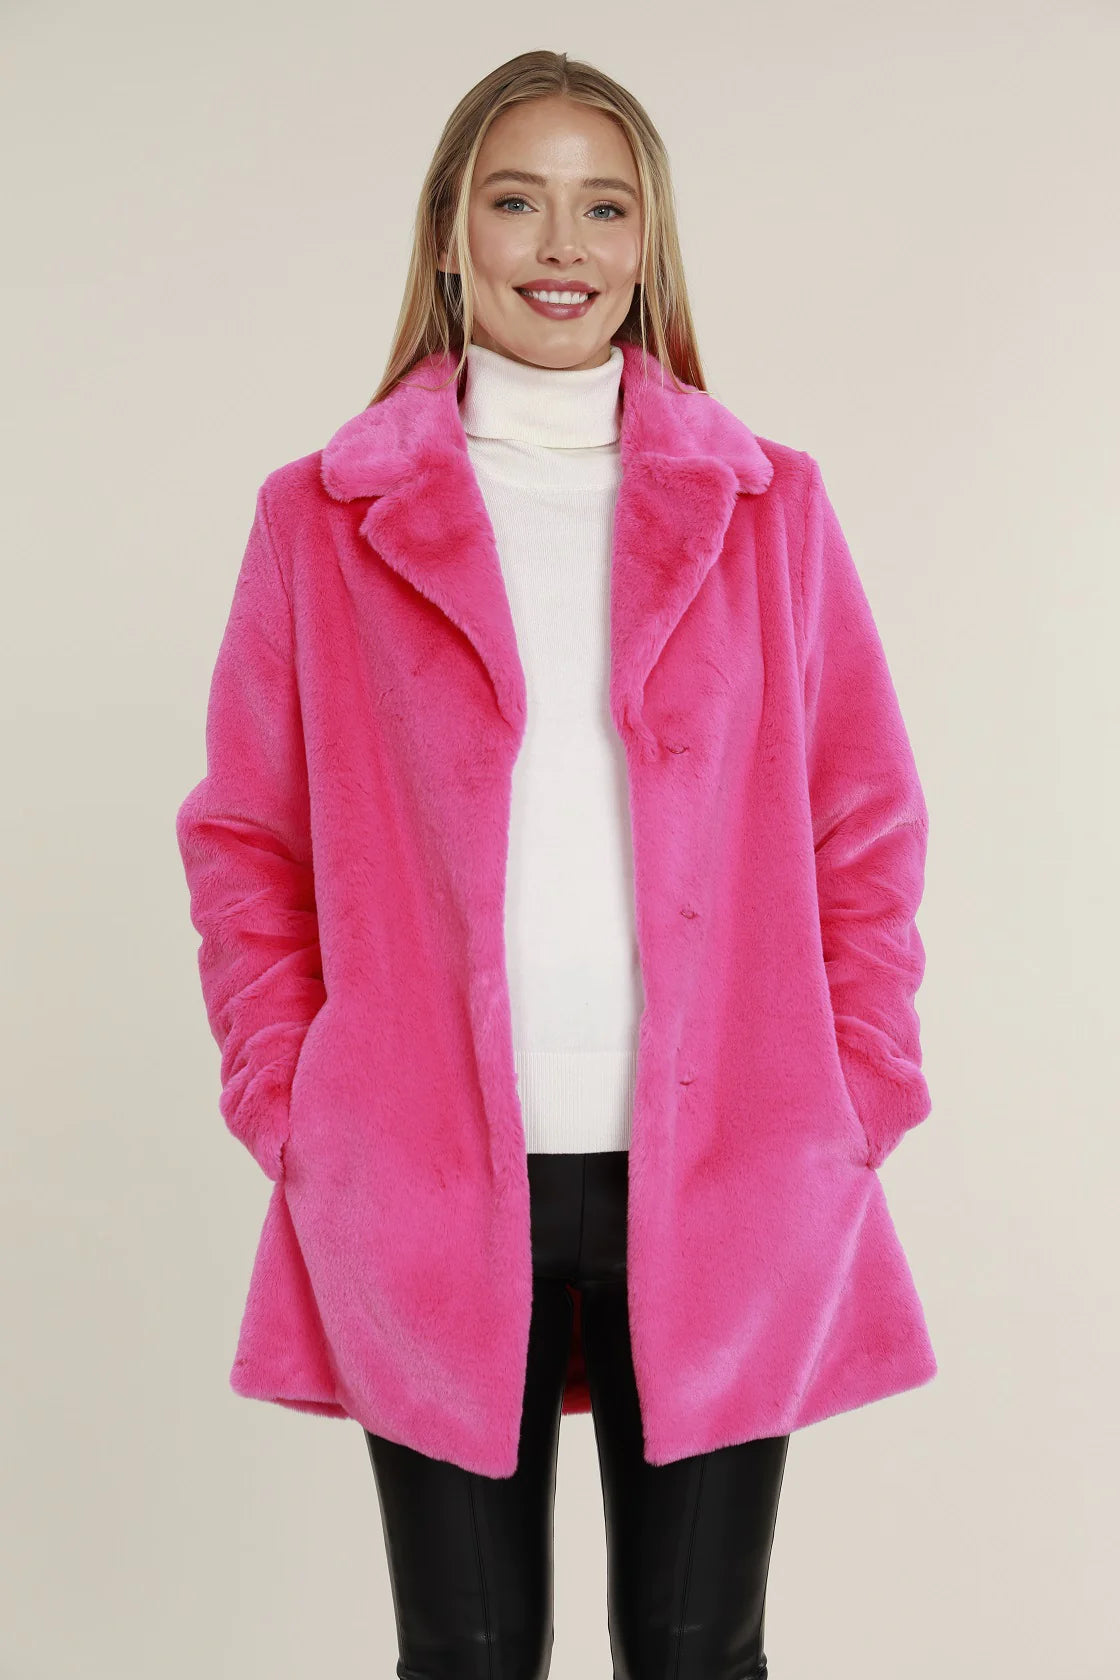 Bundle Me Up Faux Fur Coat - Pink-150 Cardigan Layers-Dolce Cabo-Coastal Bloom Boutique, find the trendiest versions of the popular styles and looks Located in Indialantic, FL